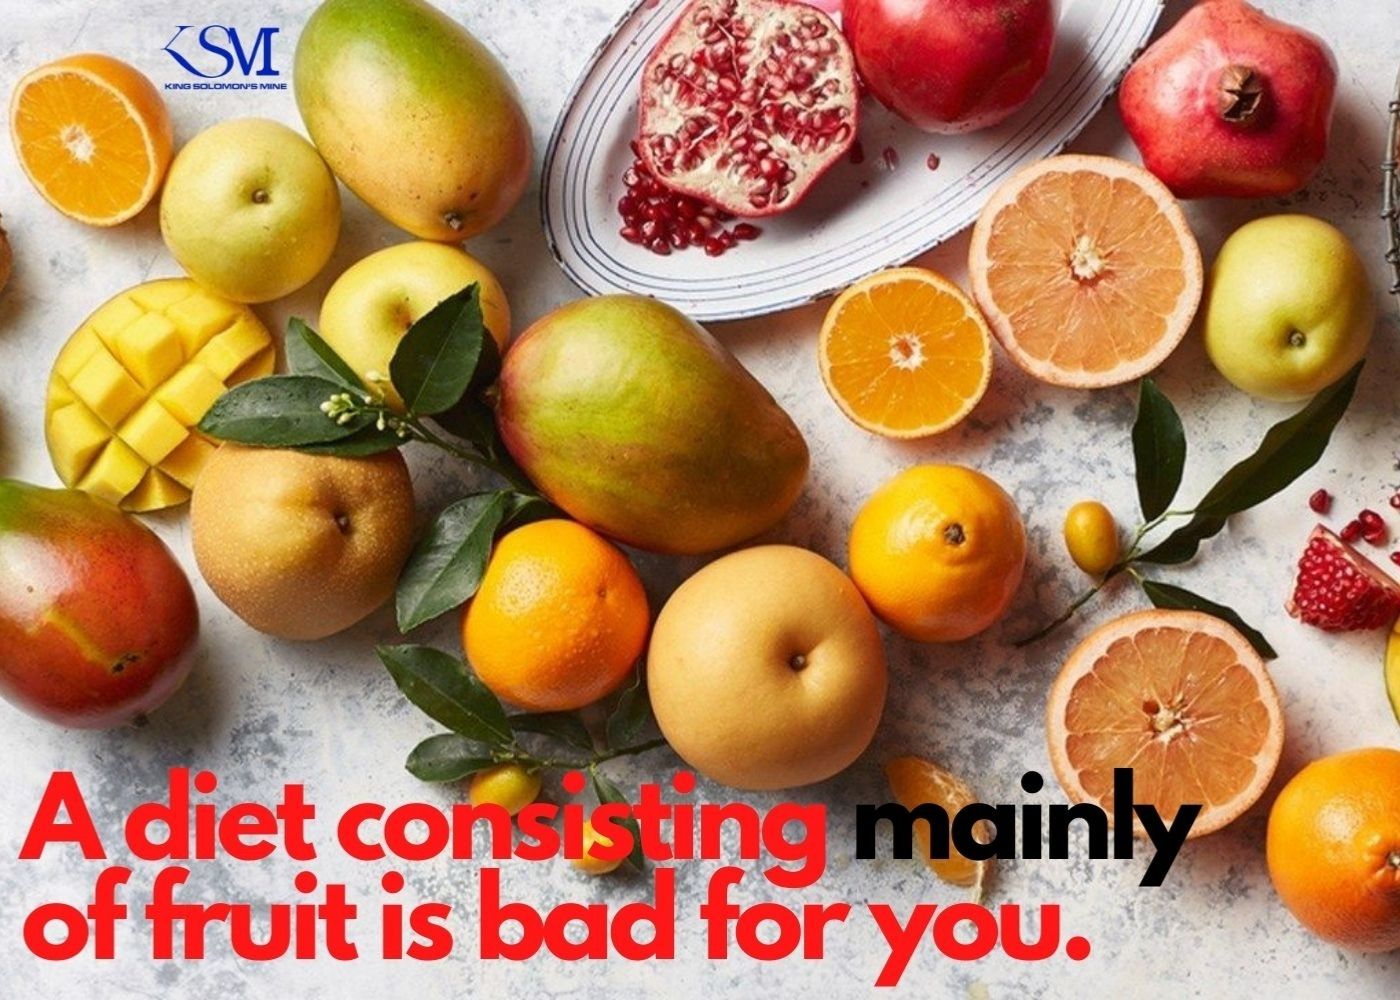 Do You Know A Diet Consisting Mainly Of Fruit Is Bad For You?